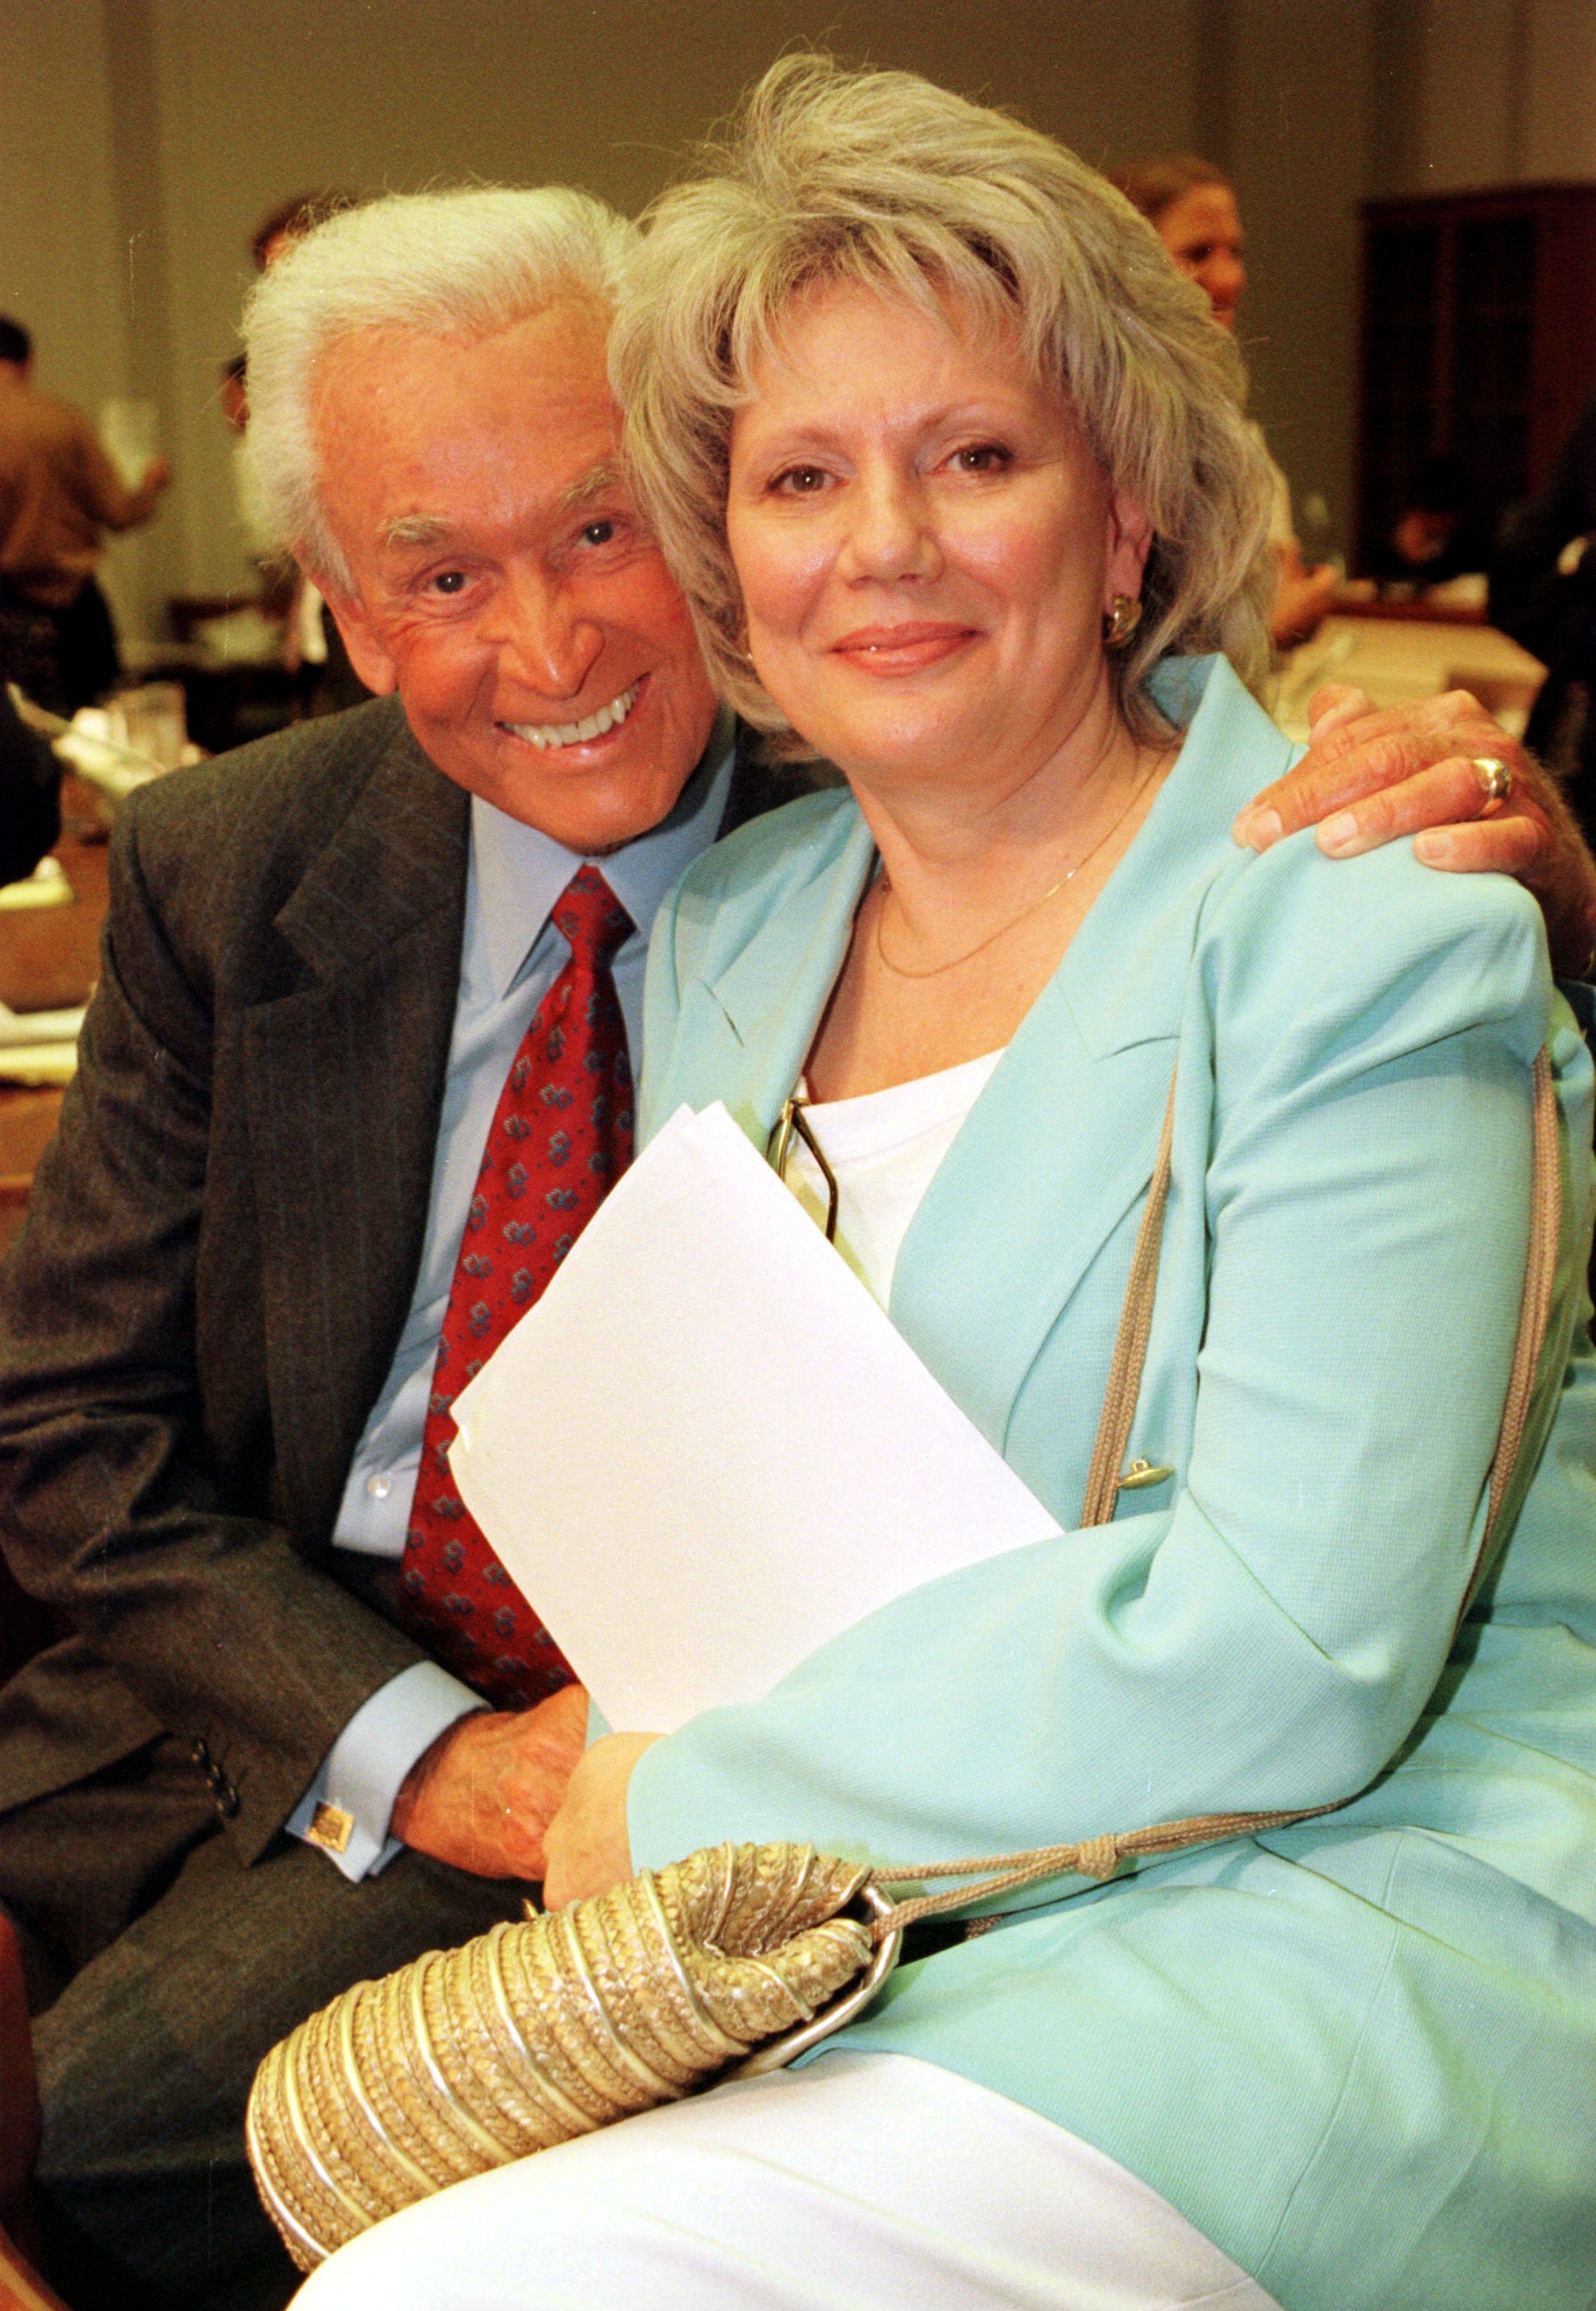 Bob Barker poses for photographers with Nancy Burnet, Director of United Activists for Animal Rights, after a hearing on the "Captive Elephant Accident Prevention Act of 1999" on Capitol Hill, June 13, 2000, in Washington. | Source: Getty Images